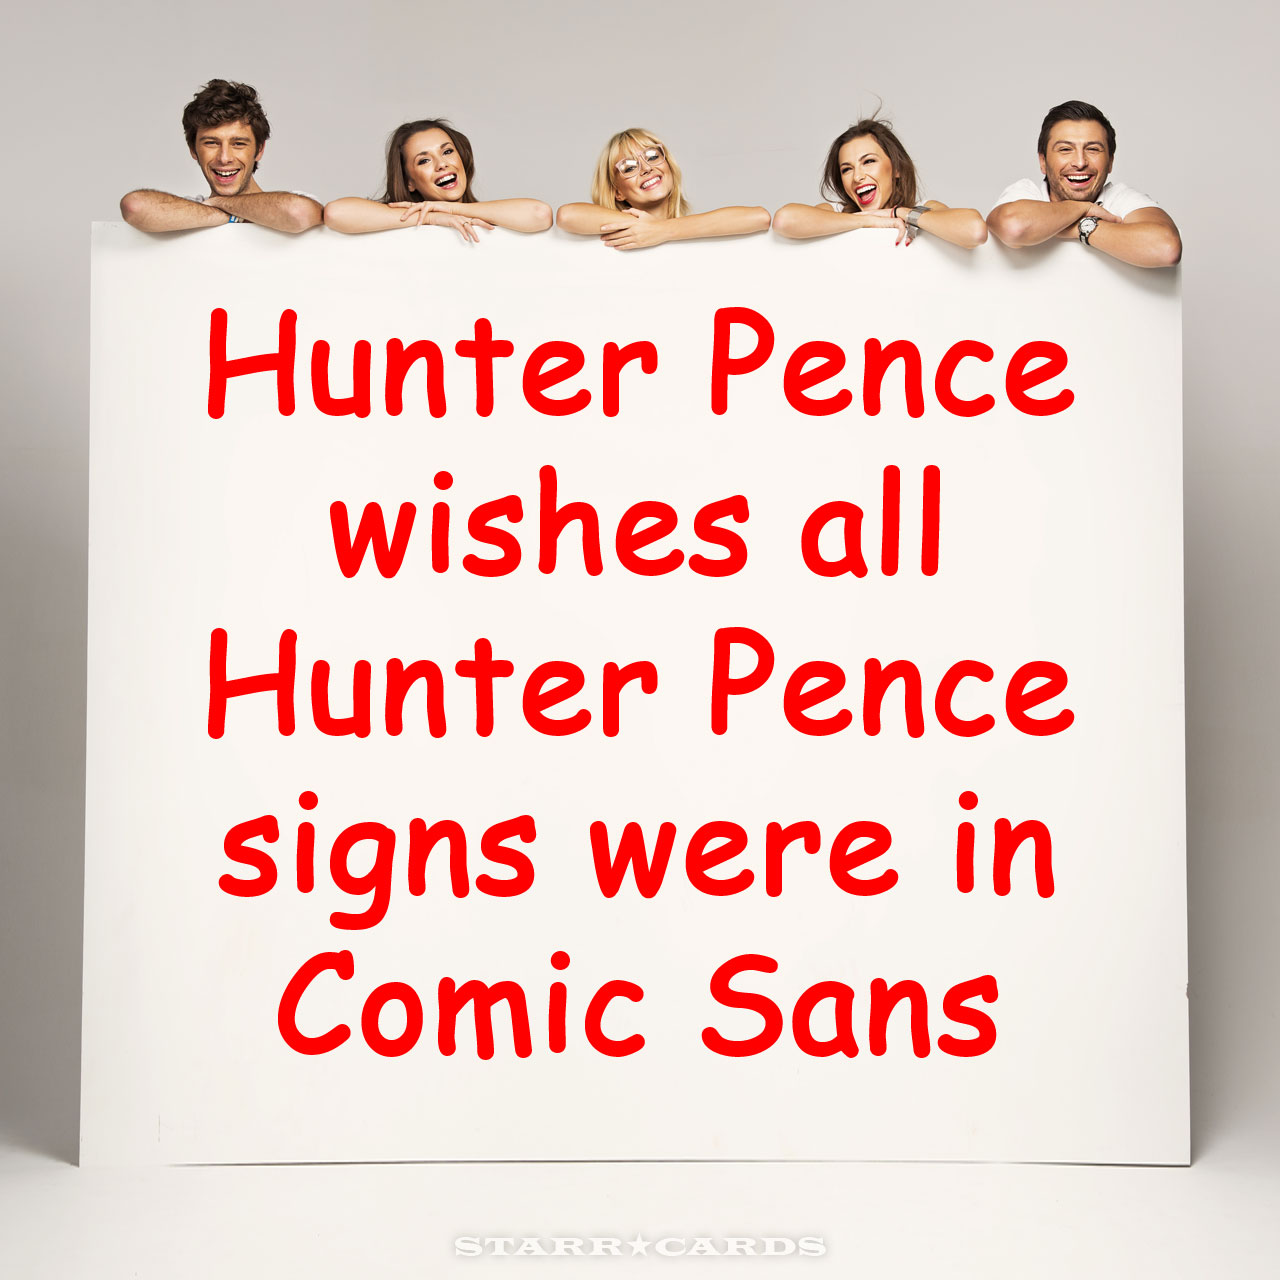 Hunter Pence wishes all Hunter Pence signs were in Comic Sans